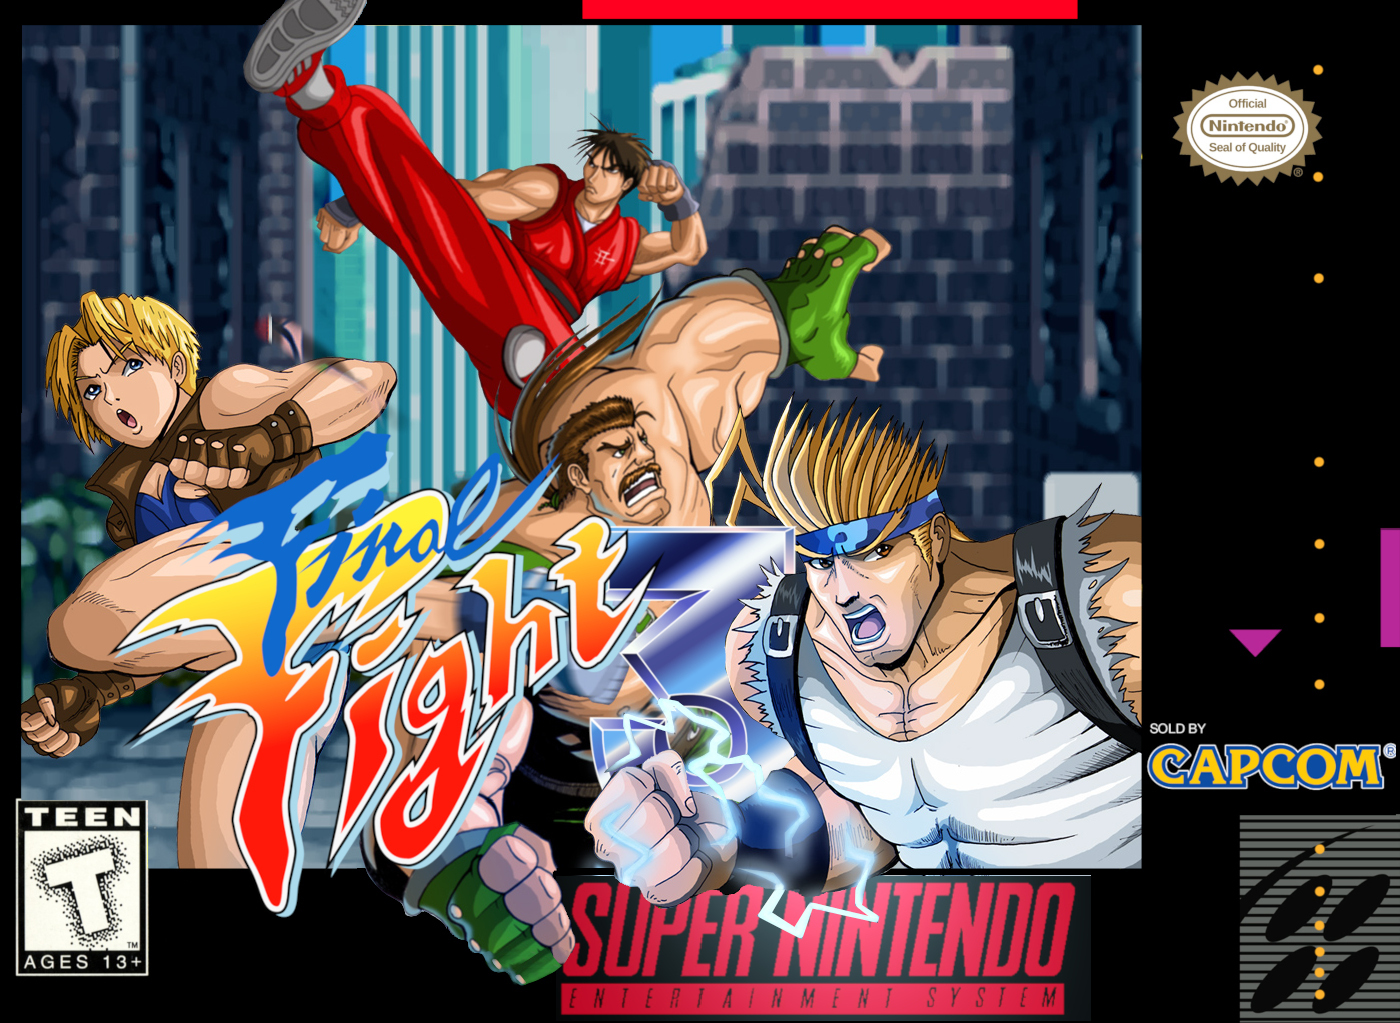 download final fight 3